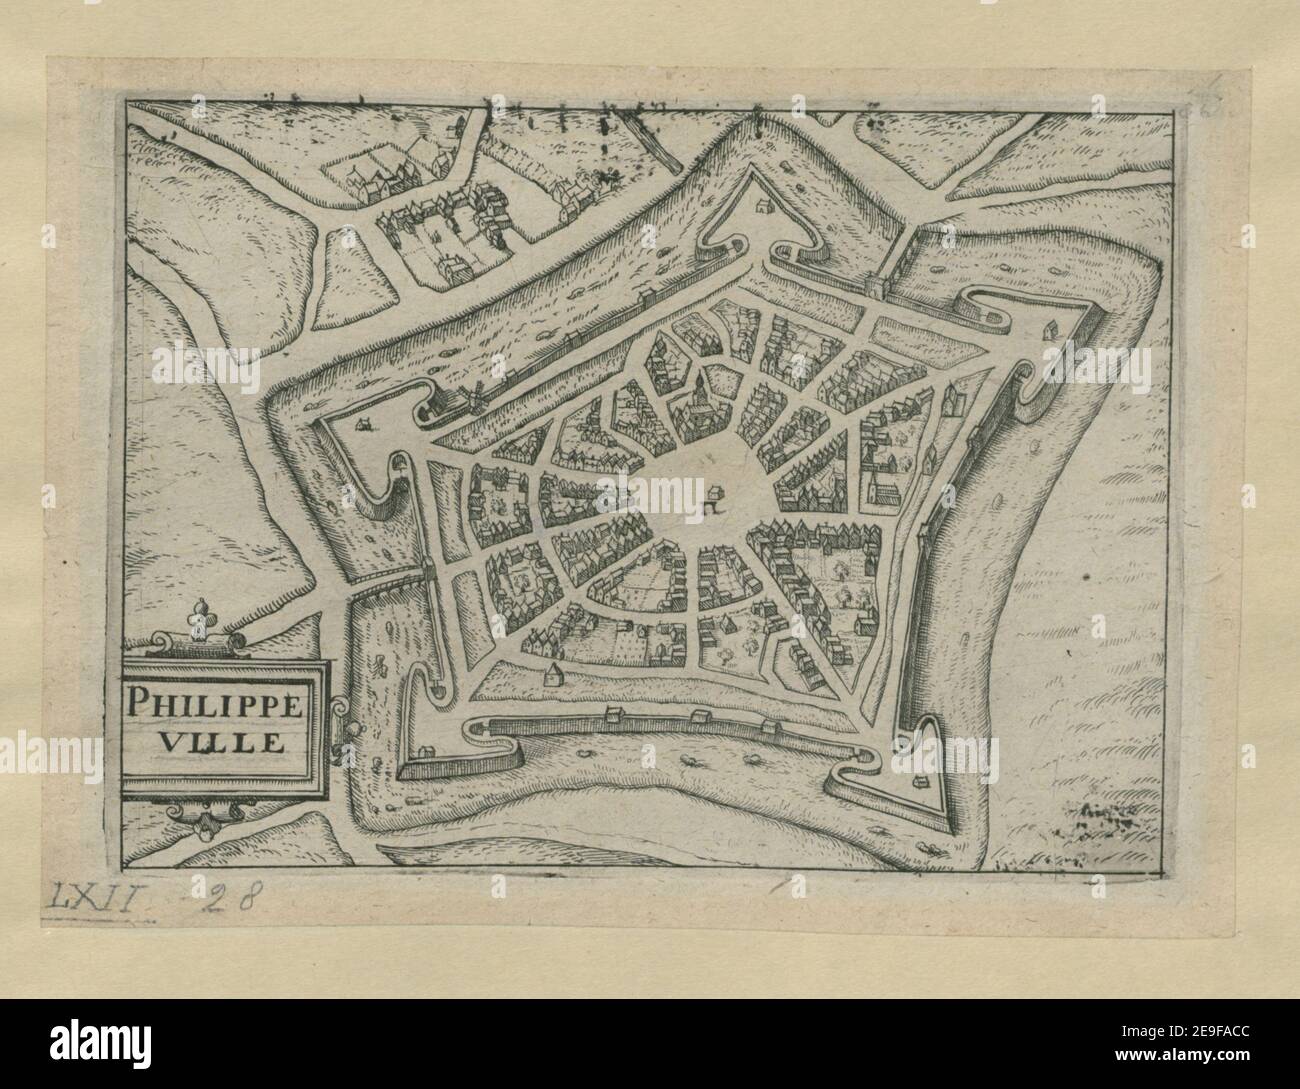 PHILIPPEVILLE. Map information:  Title: PHILIPPEVILLE. 62.28. Place of publication: [Antwerp?] Publisher: [publisher not identified] Date of publication: [between 1580 and 1650]  Item type: 1 map Medium: etching Dimensions: 11.7 x 16 cm  Former owner: George III, King of Great Britain, 1738-1820 Stock Photo